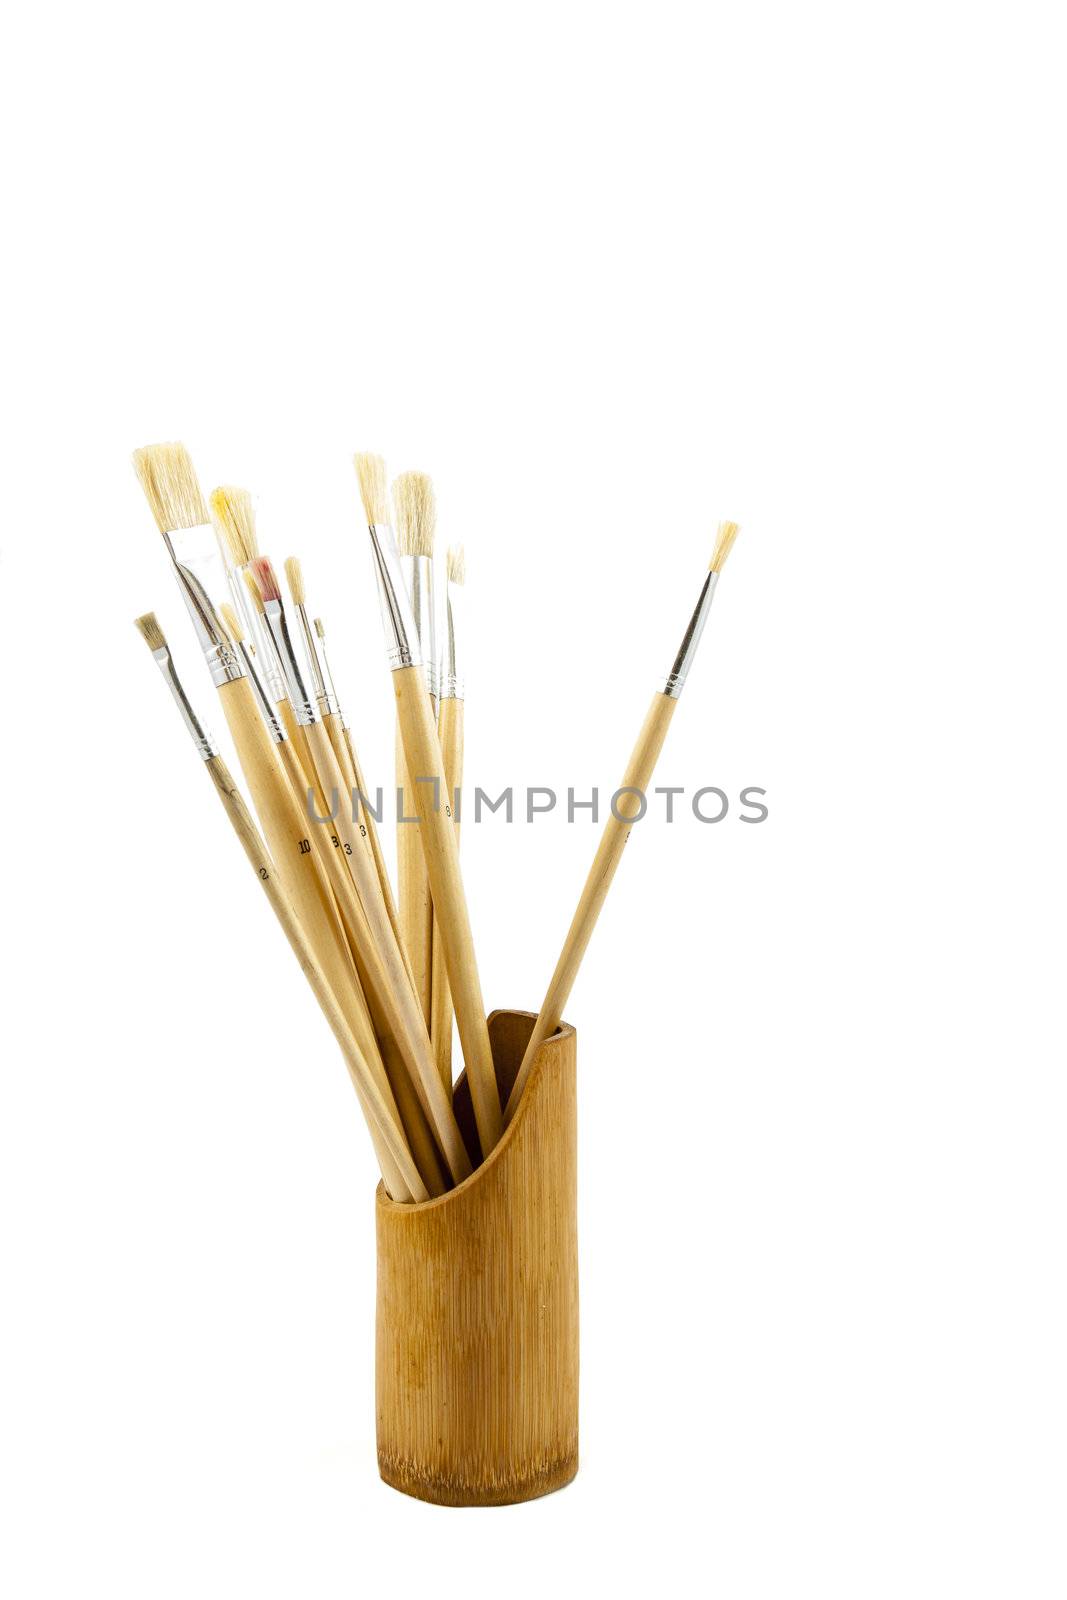 Brushes by PhotoWorks